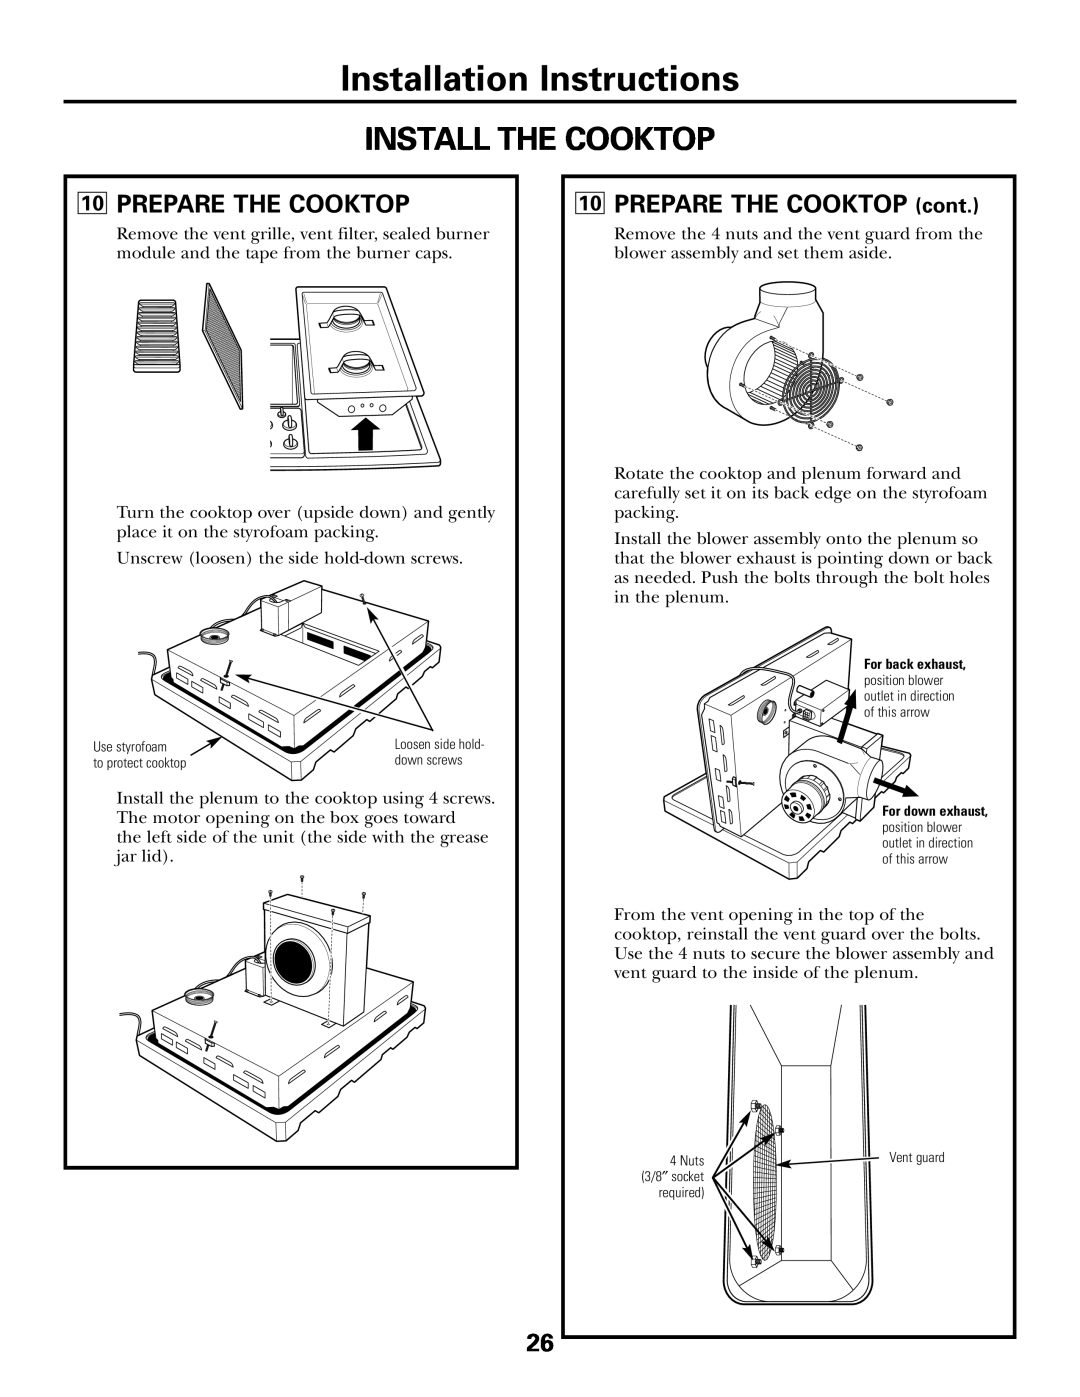 GE JGP985 owner manual Install The Cooktop, Installation Instructions, 10PREPARE THE COOKTOP cont 